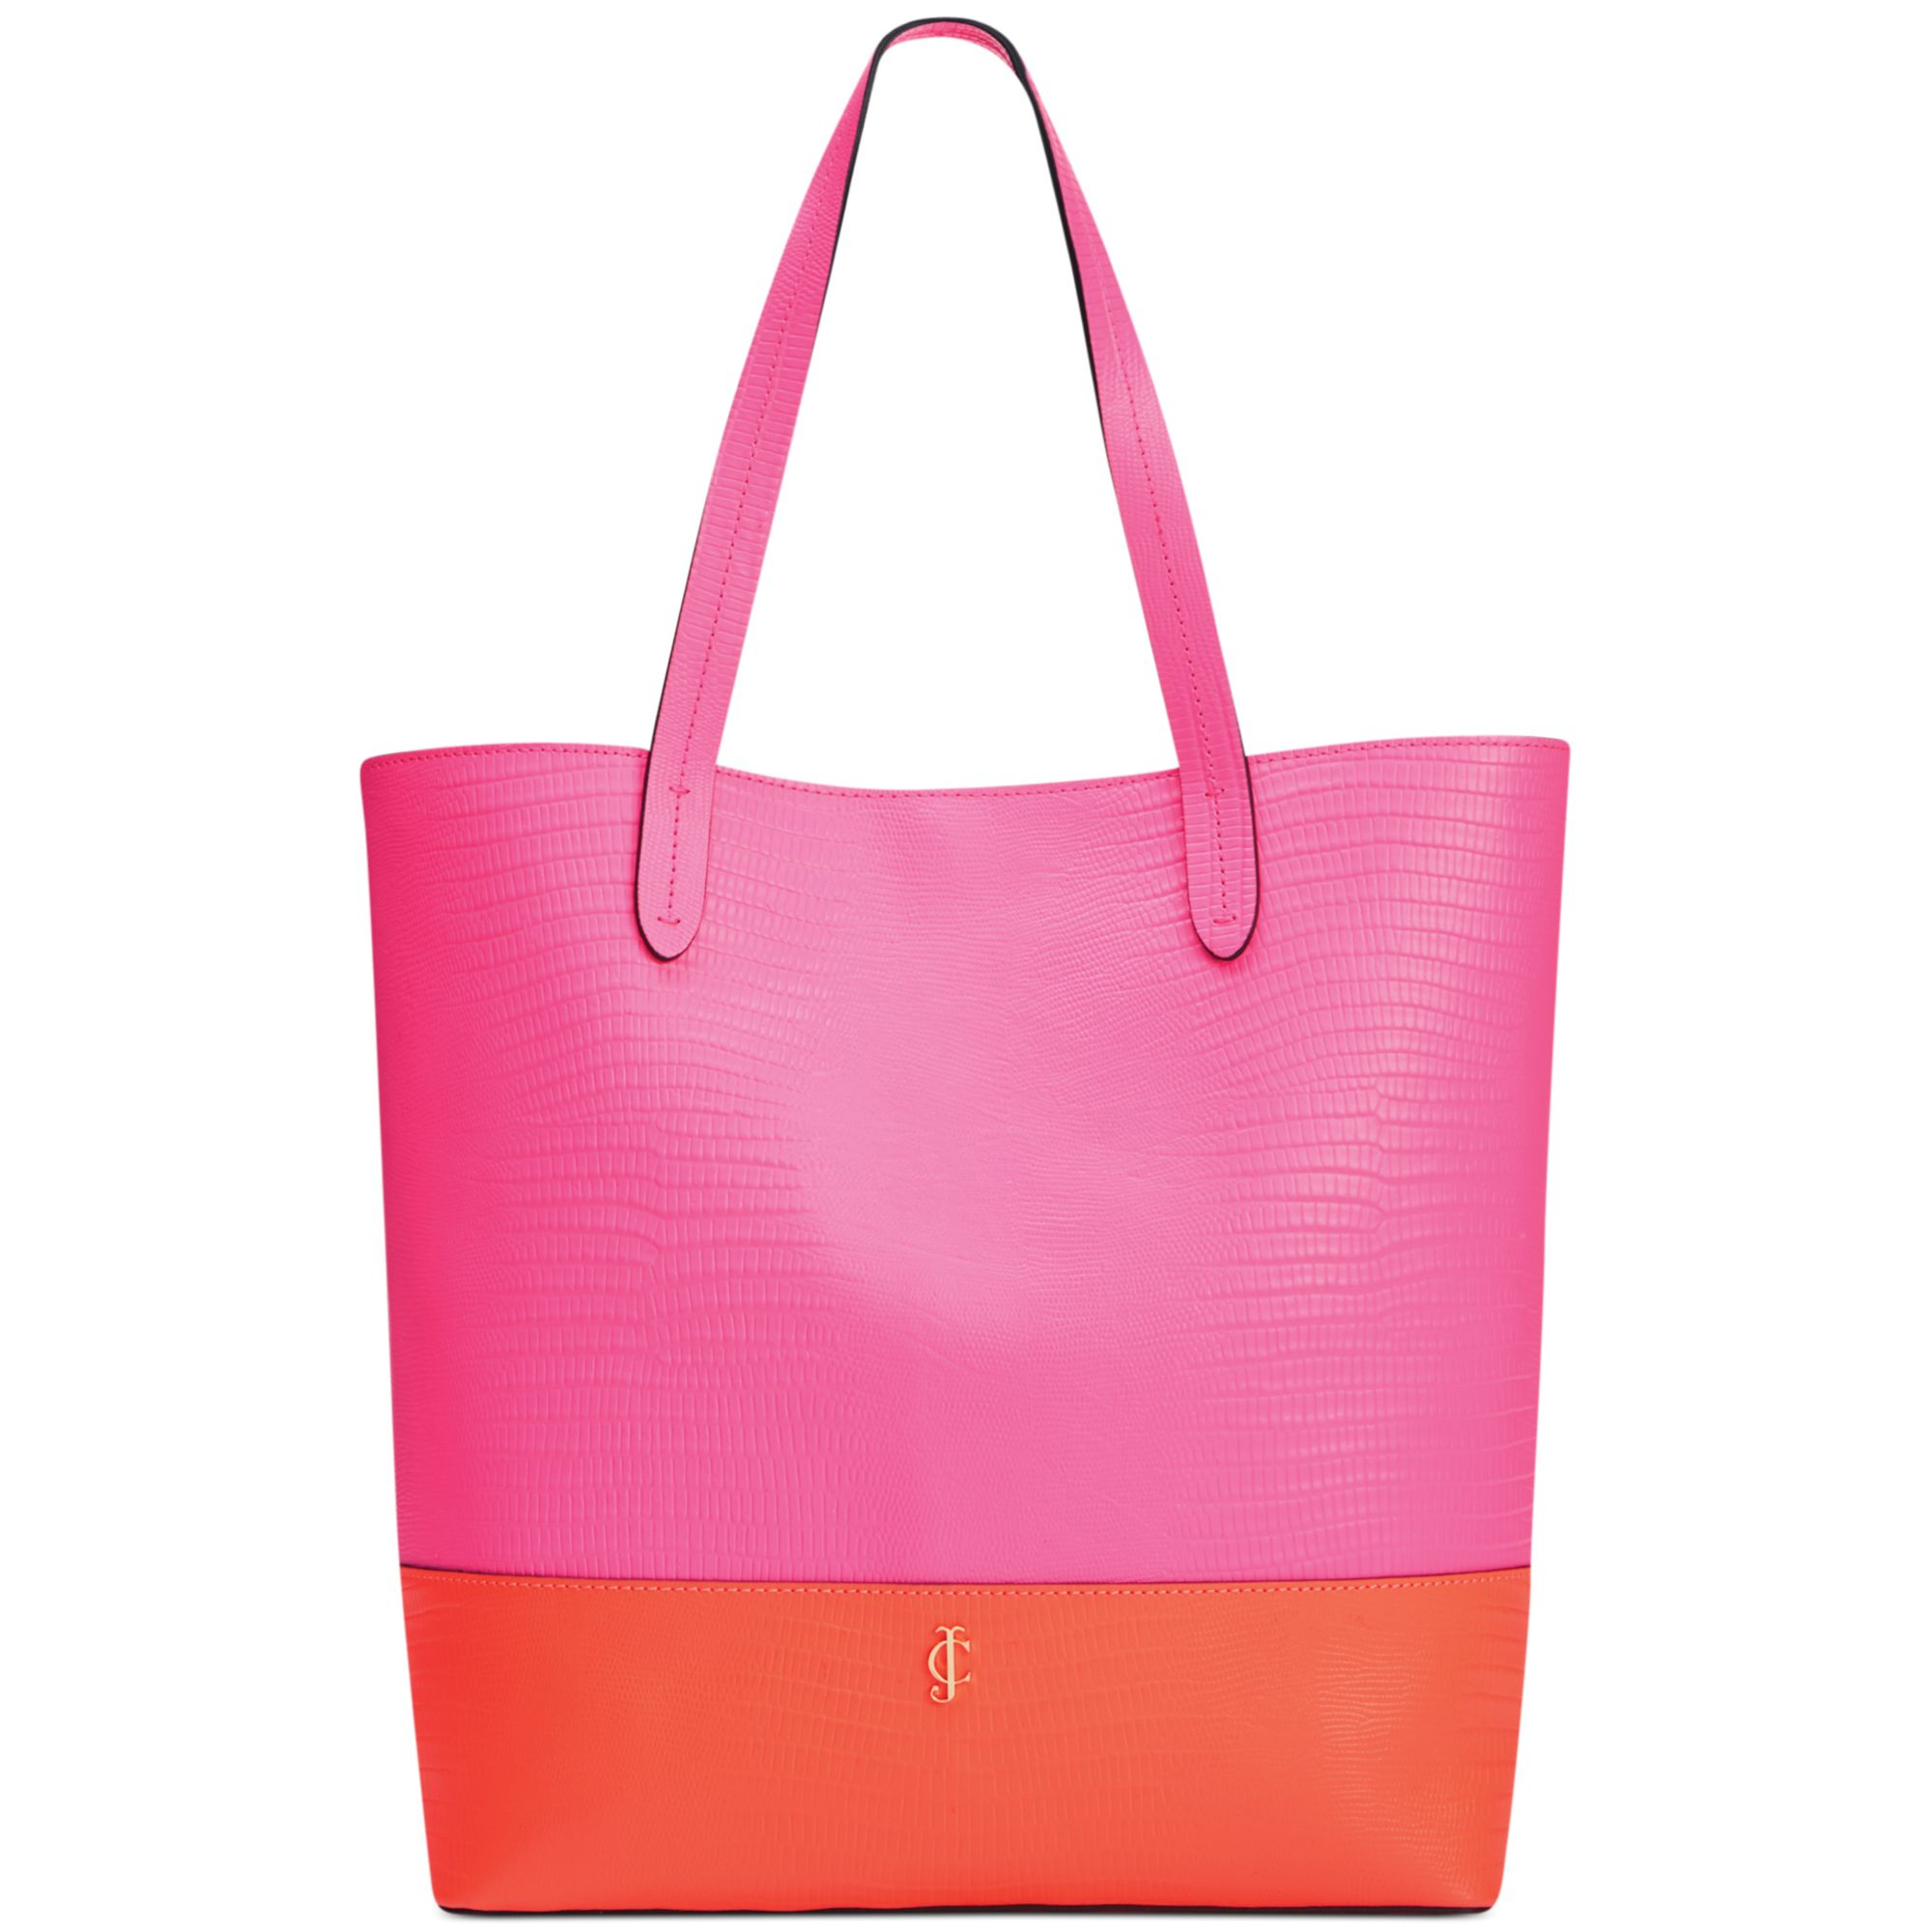 Juicy Couture Small Colorblock Tote in Pink (Strawberry/Tangerine) | Lyst